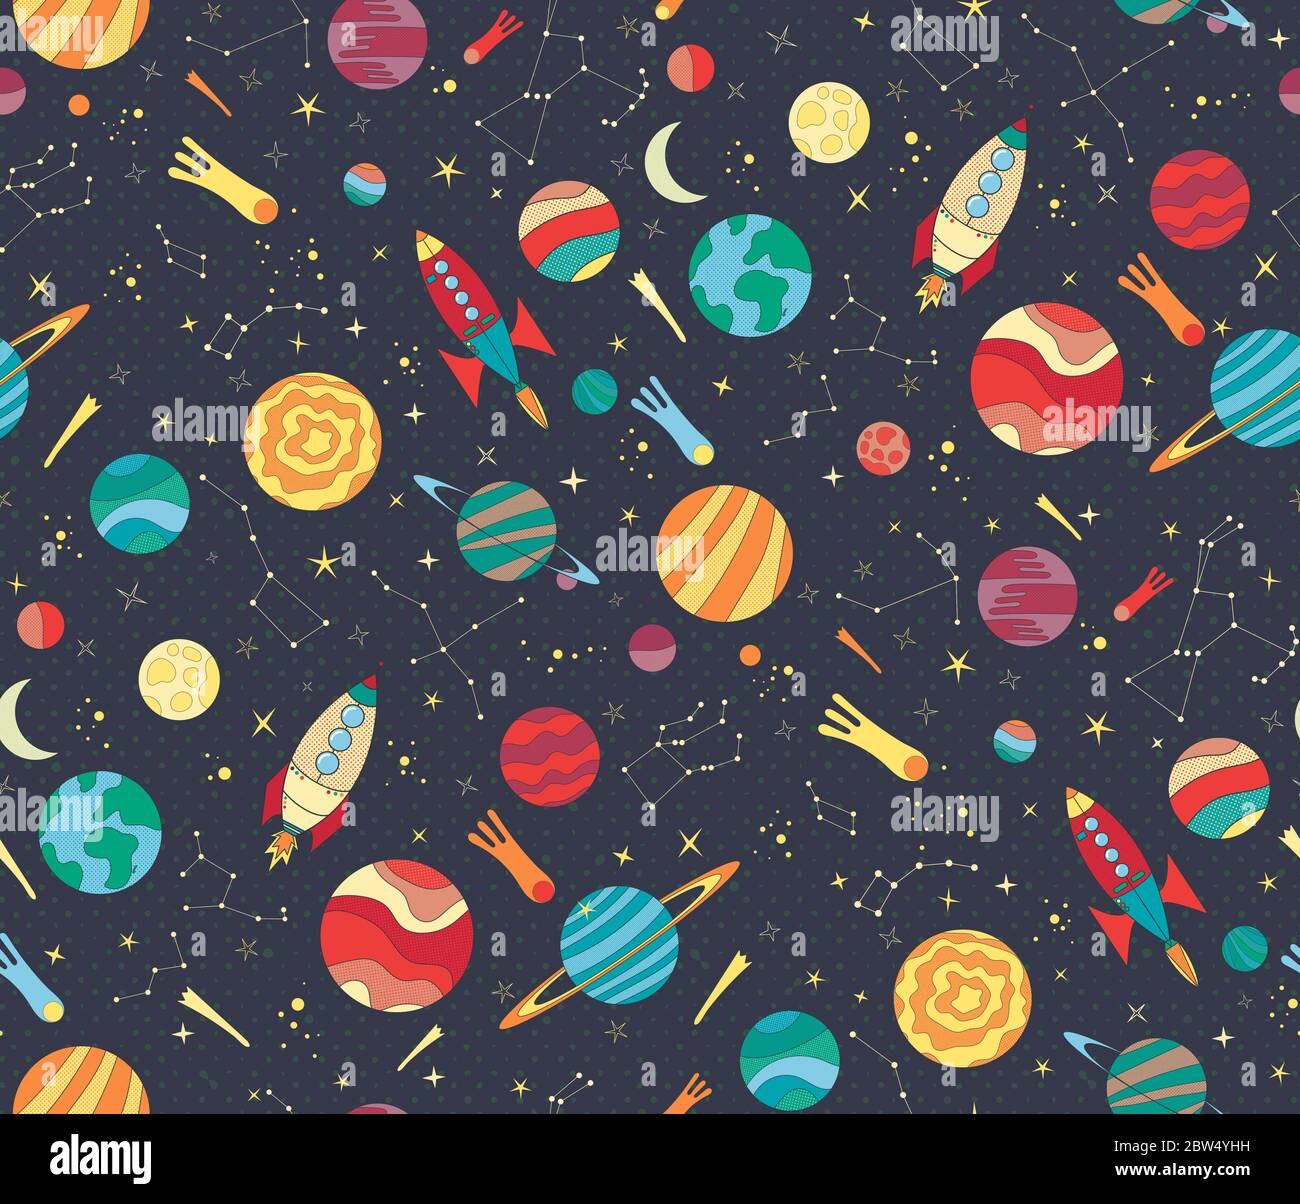 Seamless vector pattern with colorful hand drawn spaceships, planets and stars. Astronomy themed pattern for wallpaper, textiles, kids prints. Stock Vector